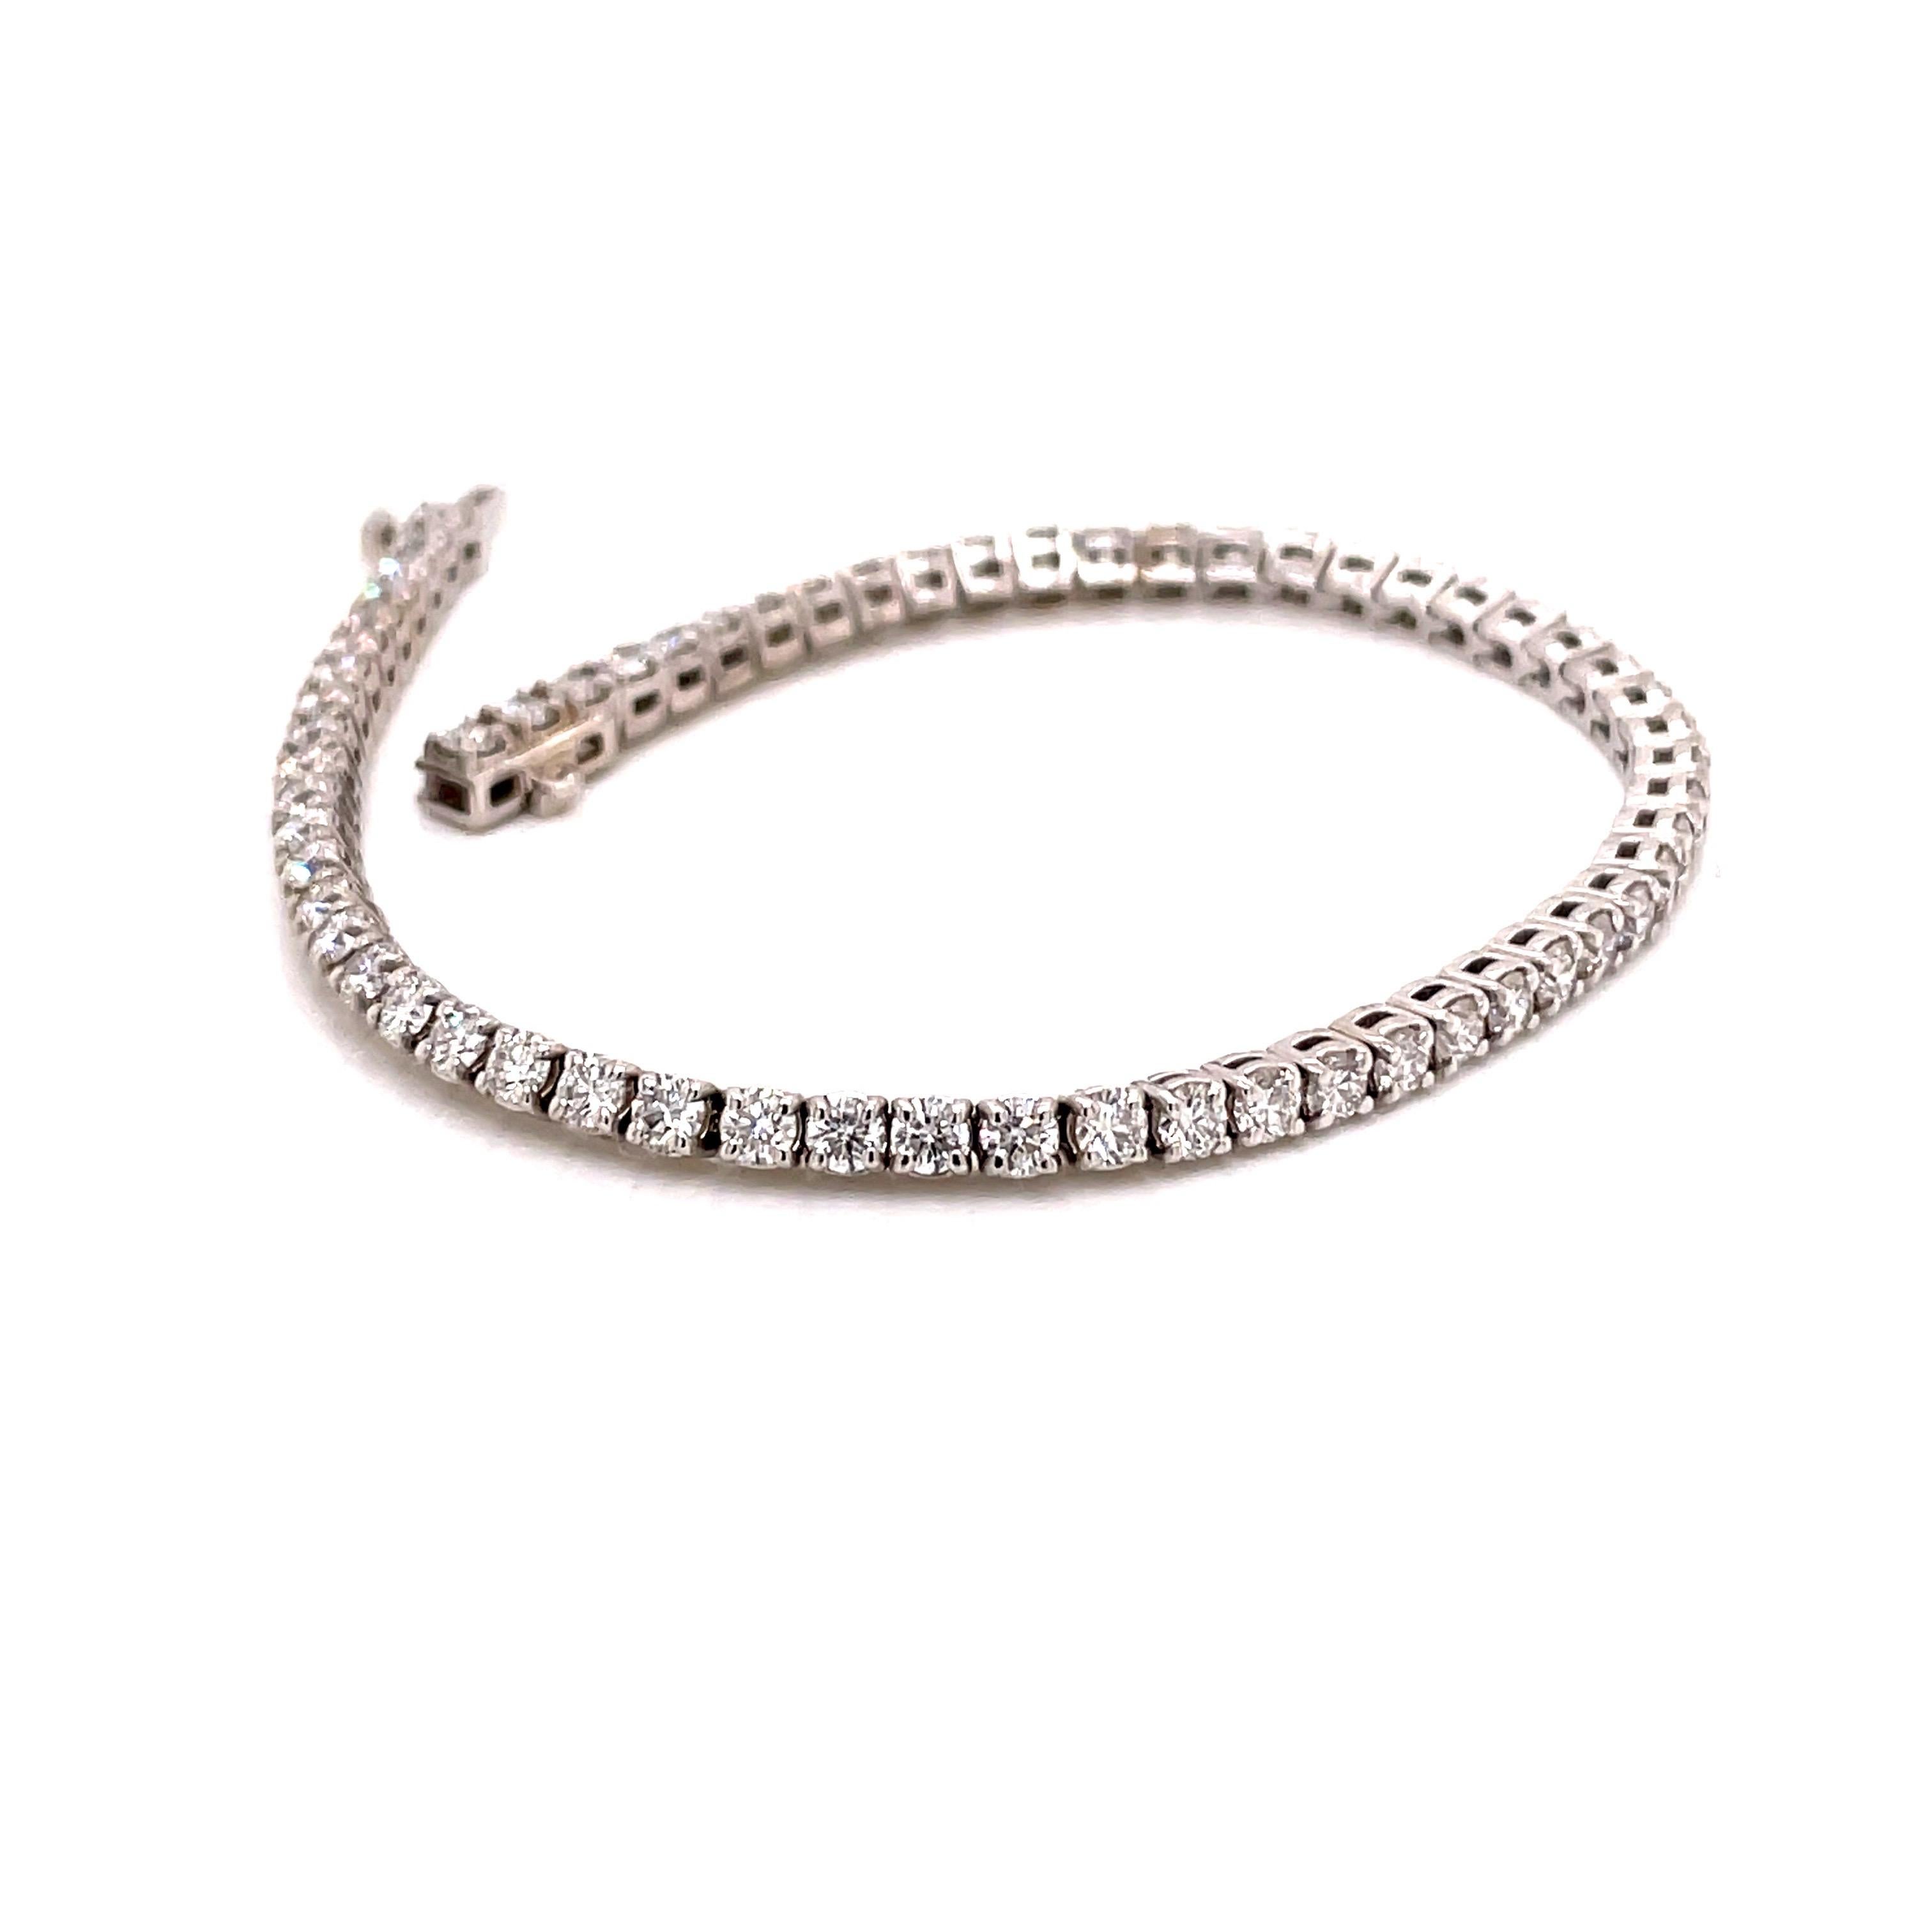 14KW Diamond Tennis Bracelet 3.84ct - the bracelet contains 63 round brilliant diamonds weighing 3.84ct with E-F color and SI1-SI2 clarity. The diamonds are ideal cut and they are set in 4 prong basket settings. The bracelet measures 7” long and